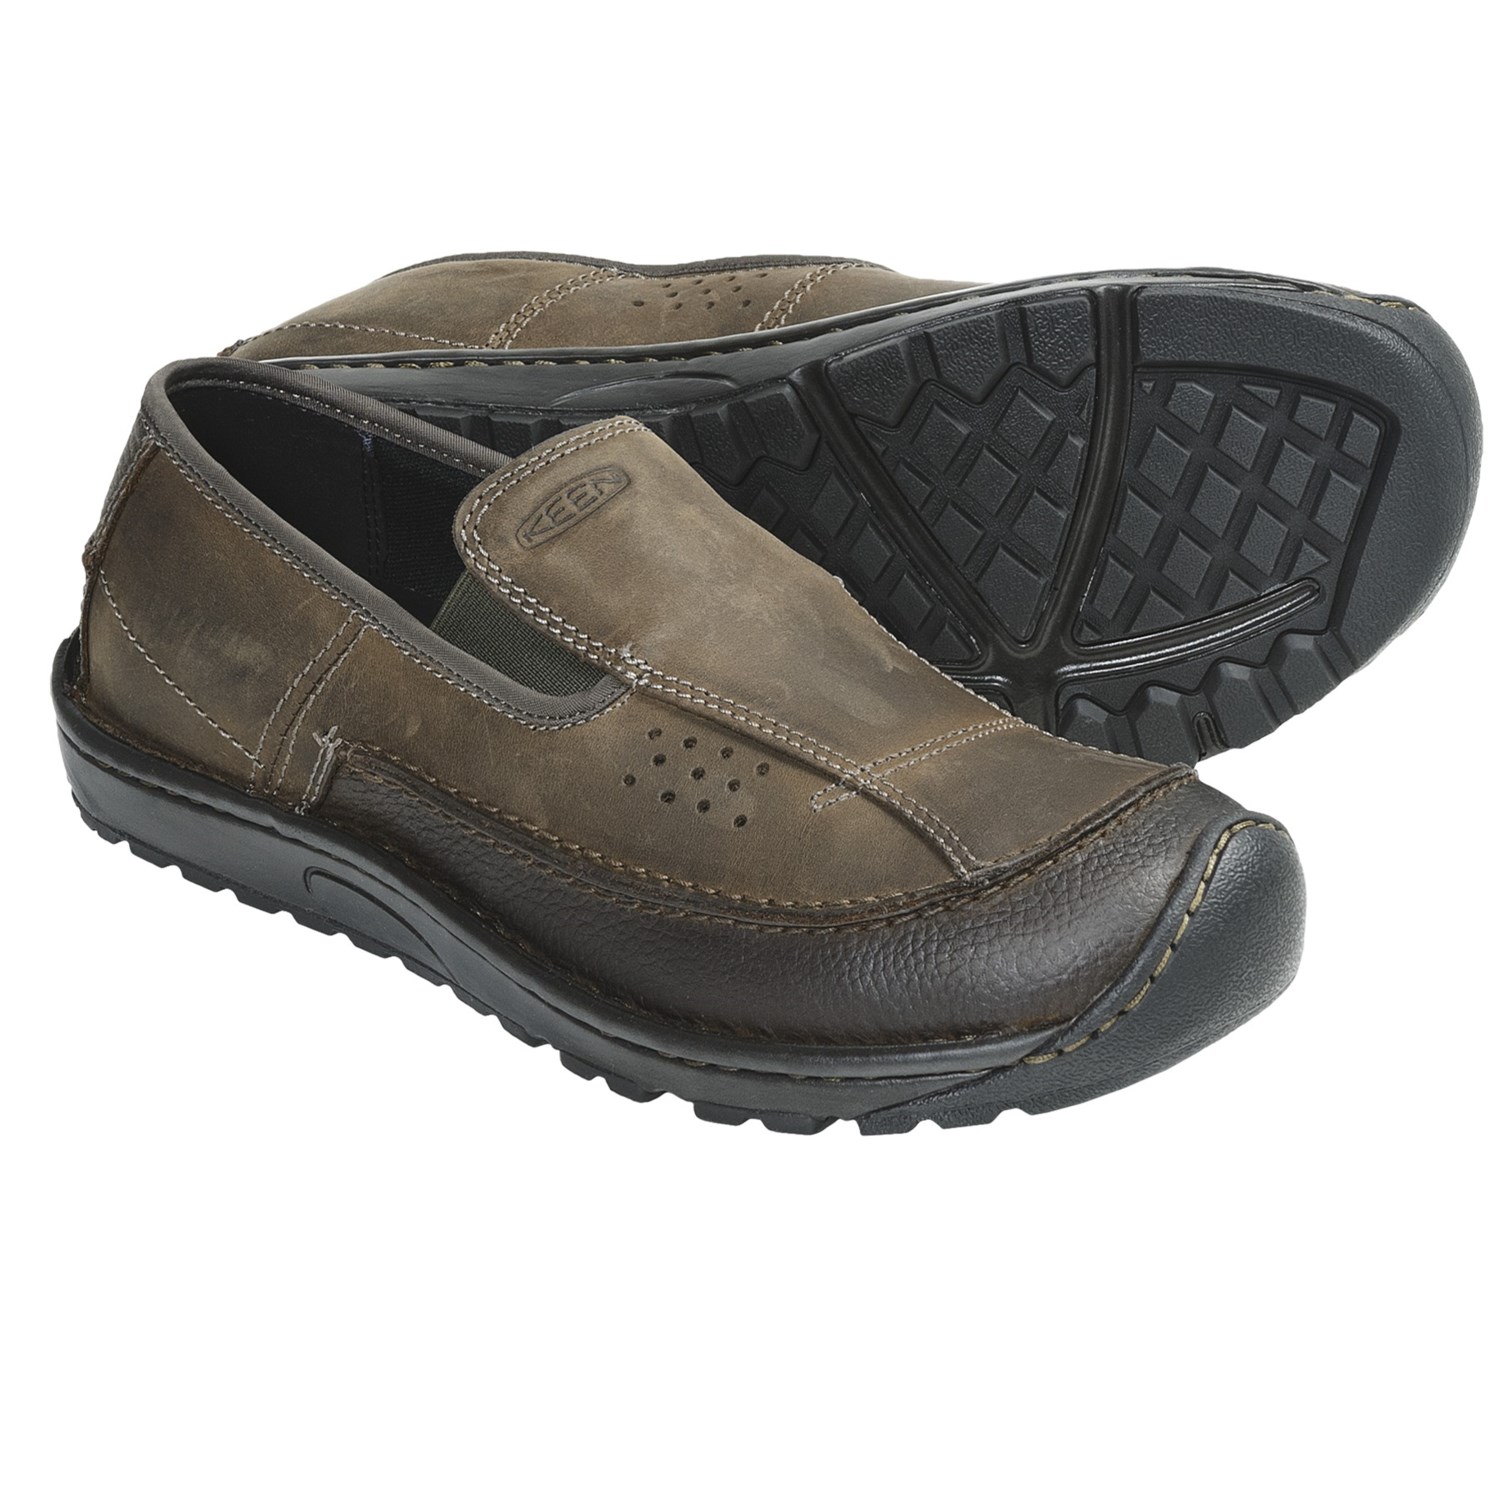 Keen Dillon Shoes (For Men) 5692Y - Save 27%